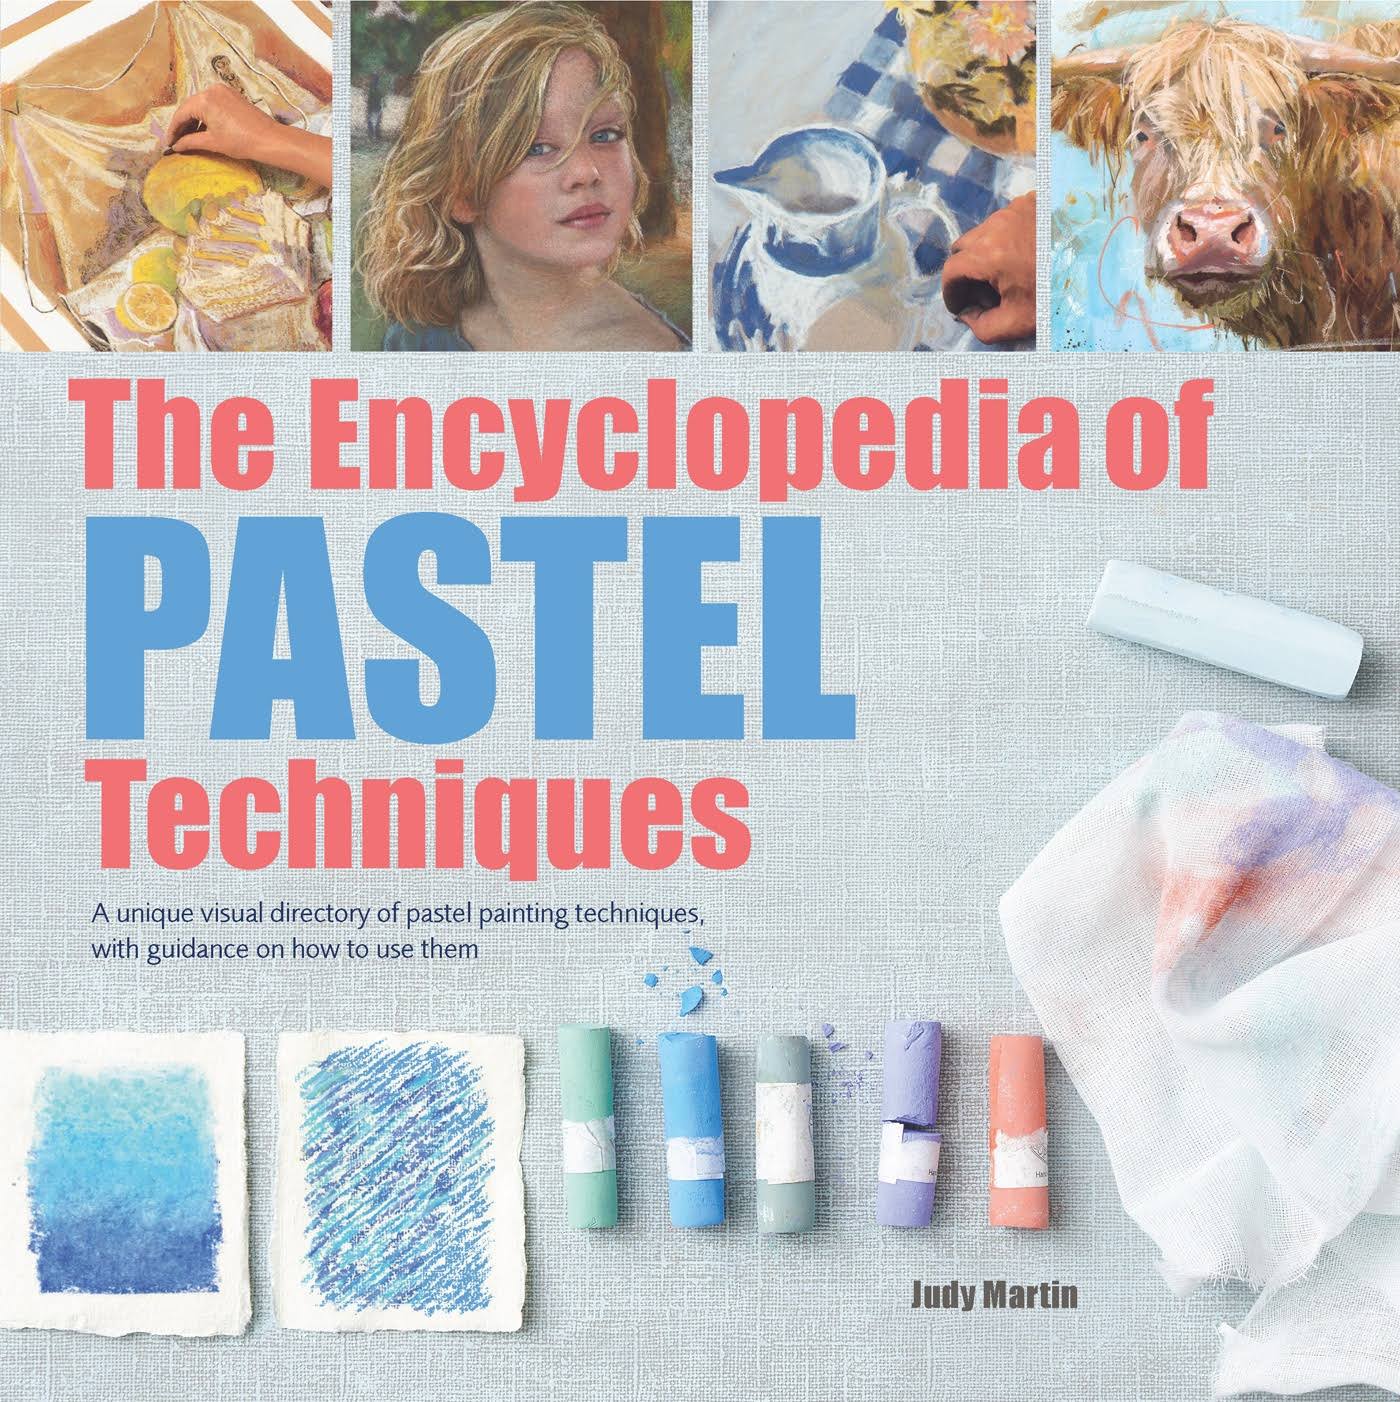 The Encyclopedia Of Pastel Techniques - Judy Martin